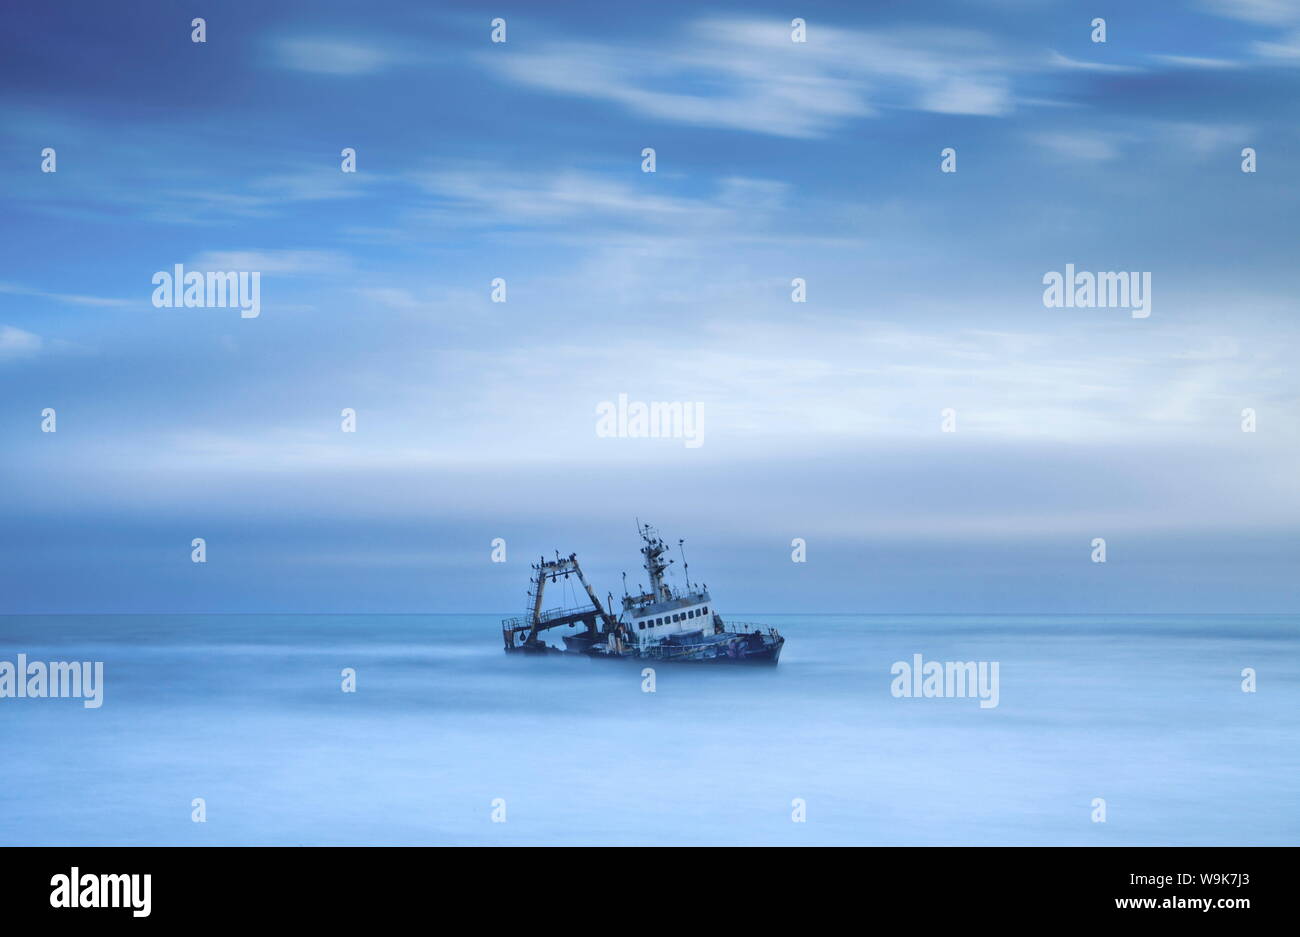 Shipwreck off the Atlantic coast, shot with long exposure to record motion in sea and sky, near Walvis Bay, Namibia, Africa Stock Photo